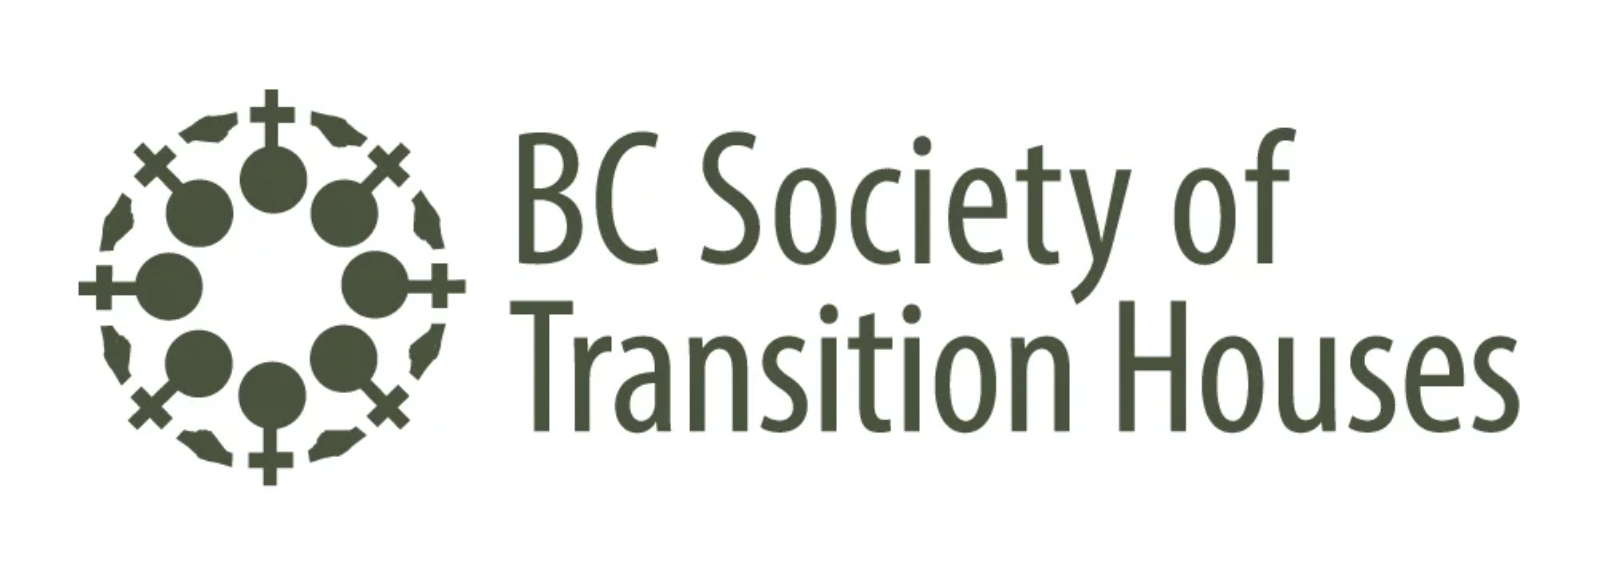 BC Society of Transition Houses